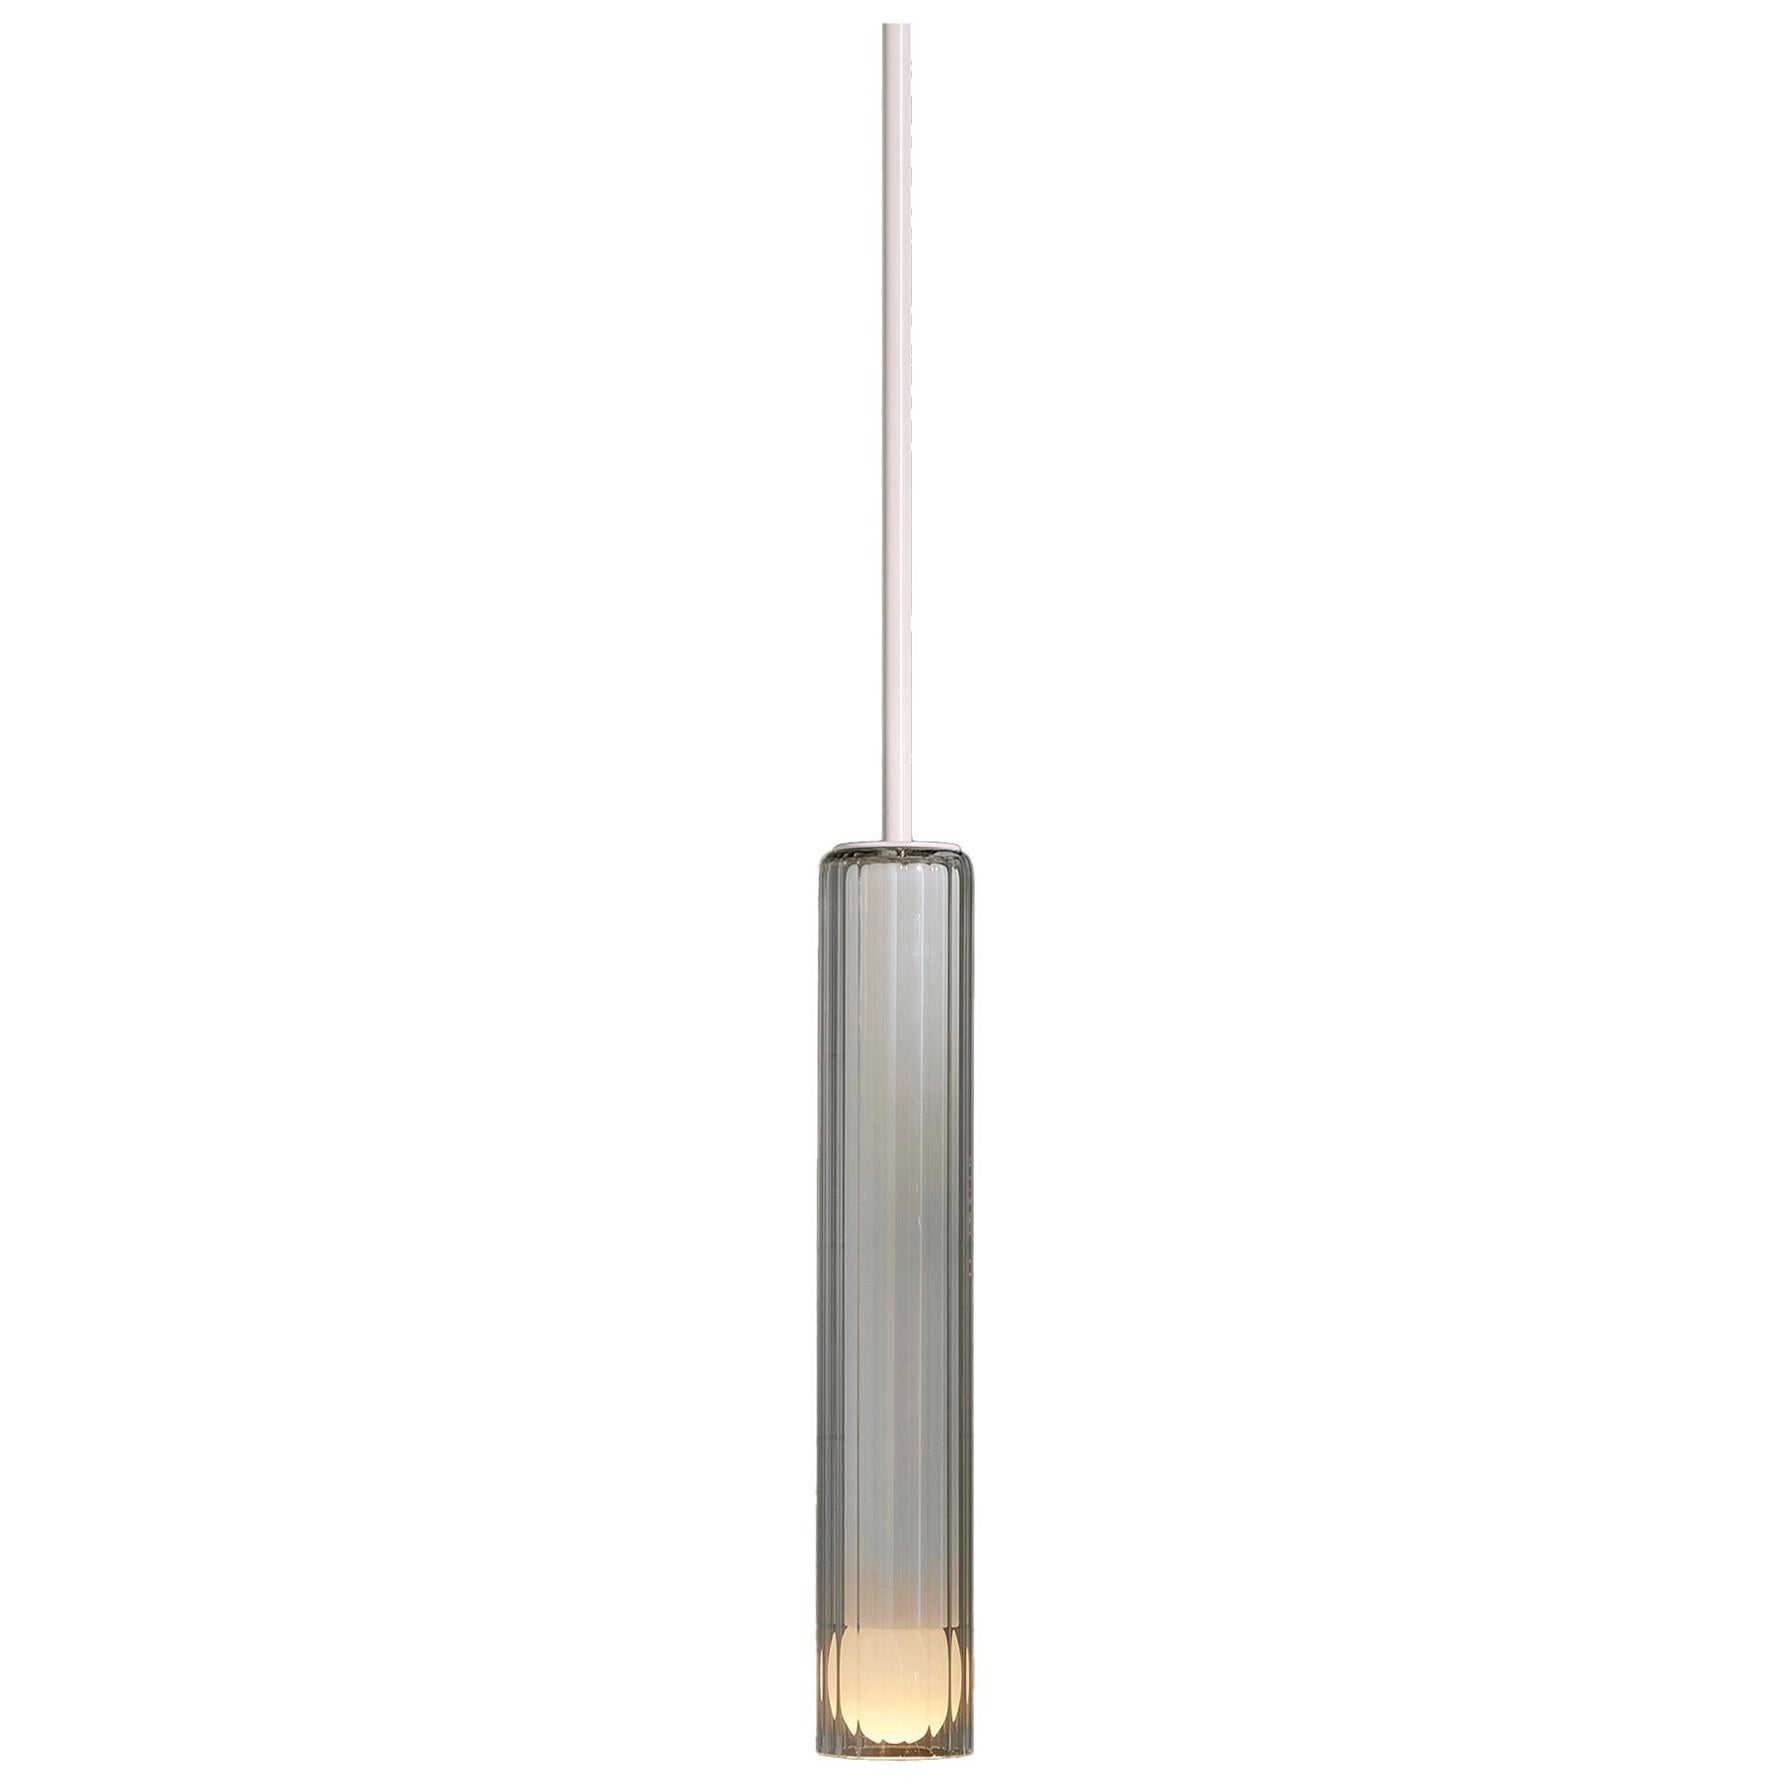 Marz Designs, "Lini Pendant Light, Tall with Solid Rod", Fluted Glass Pendant For Sale